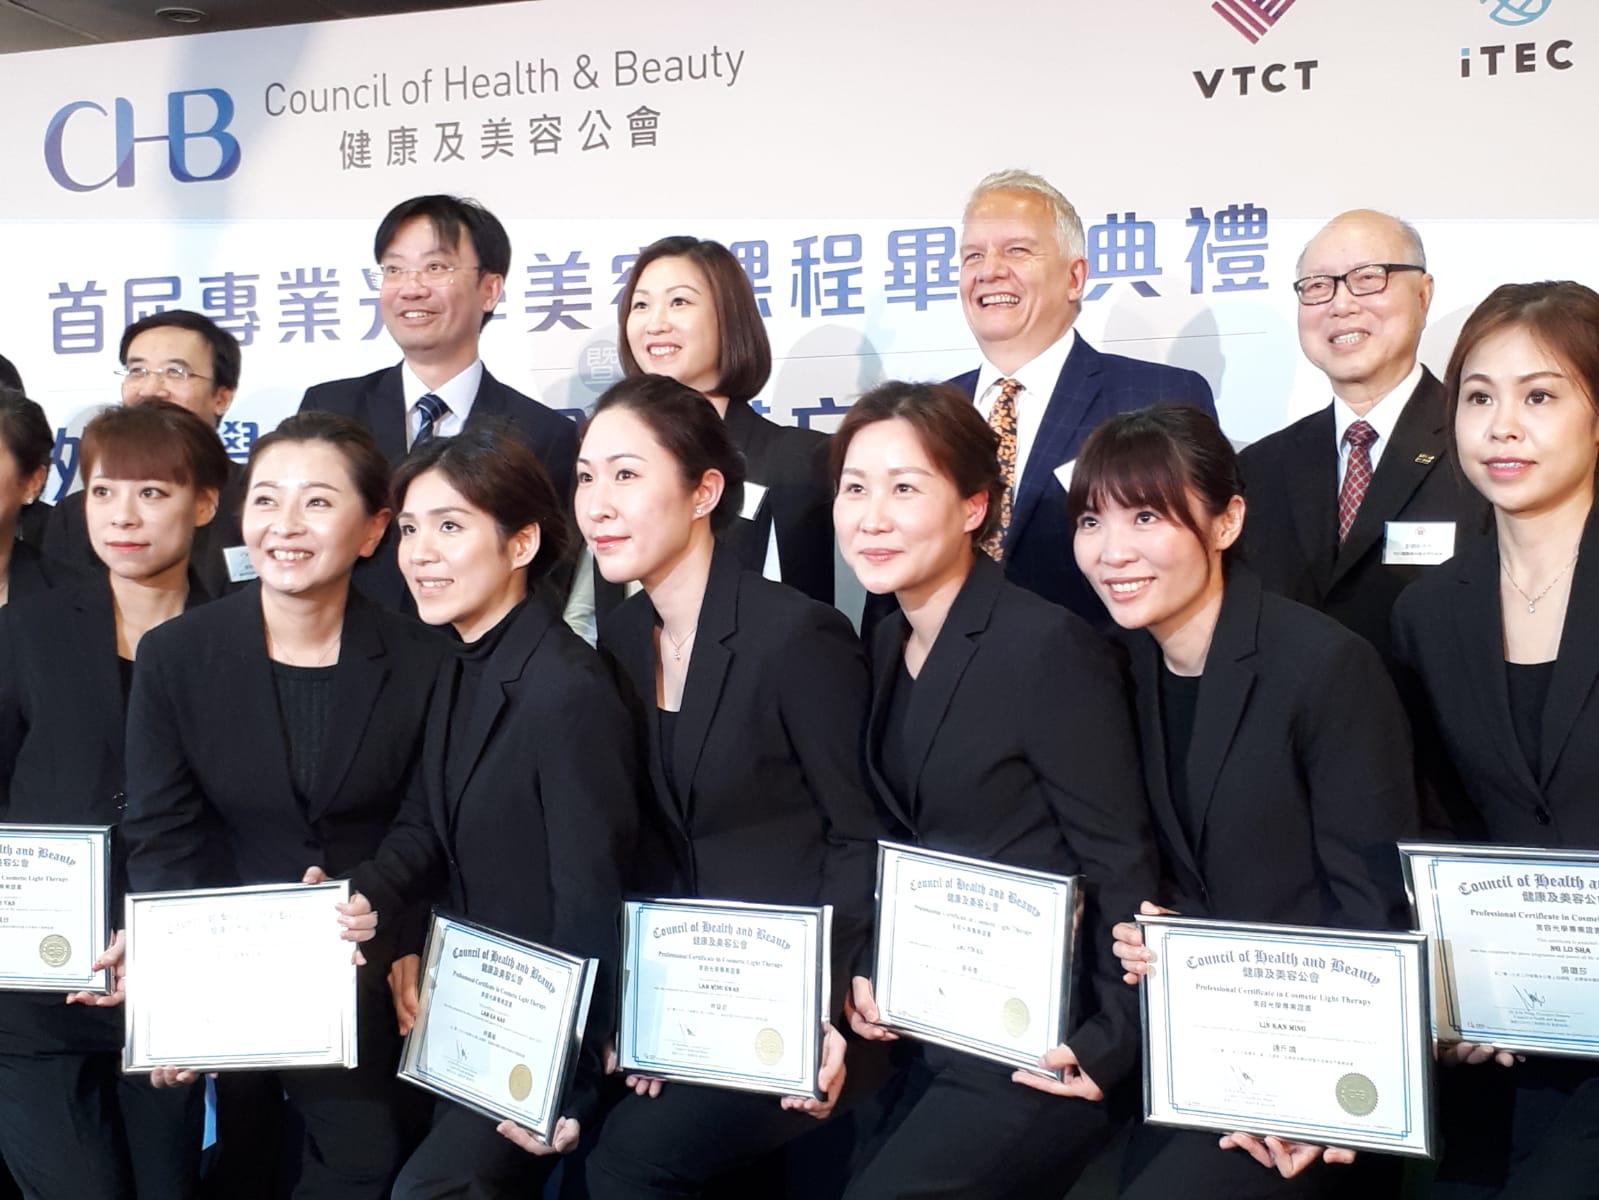 Council of Health and Beauty graduates